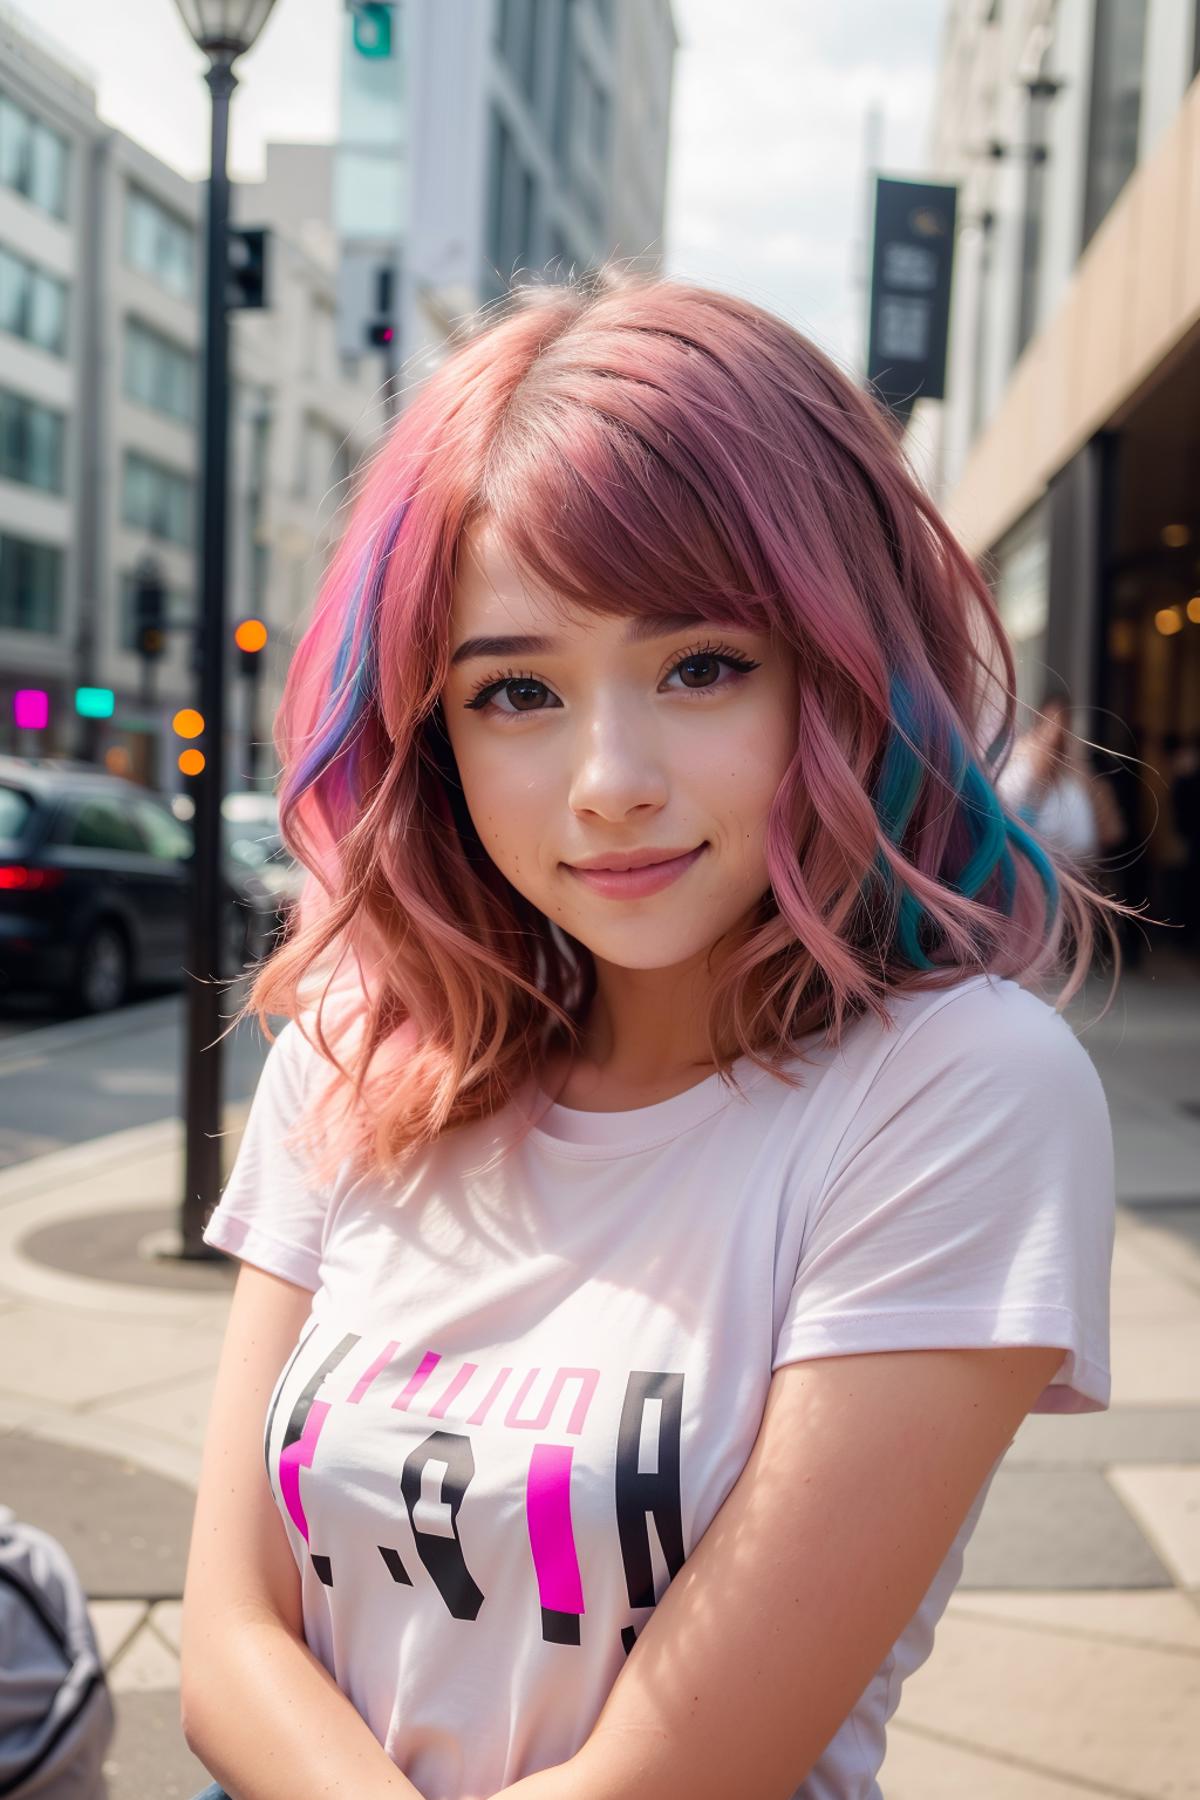 A young woman with a pink shirt and pink hair smiling.